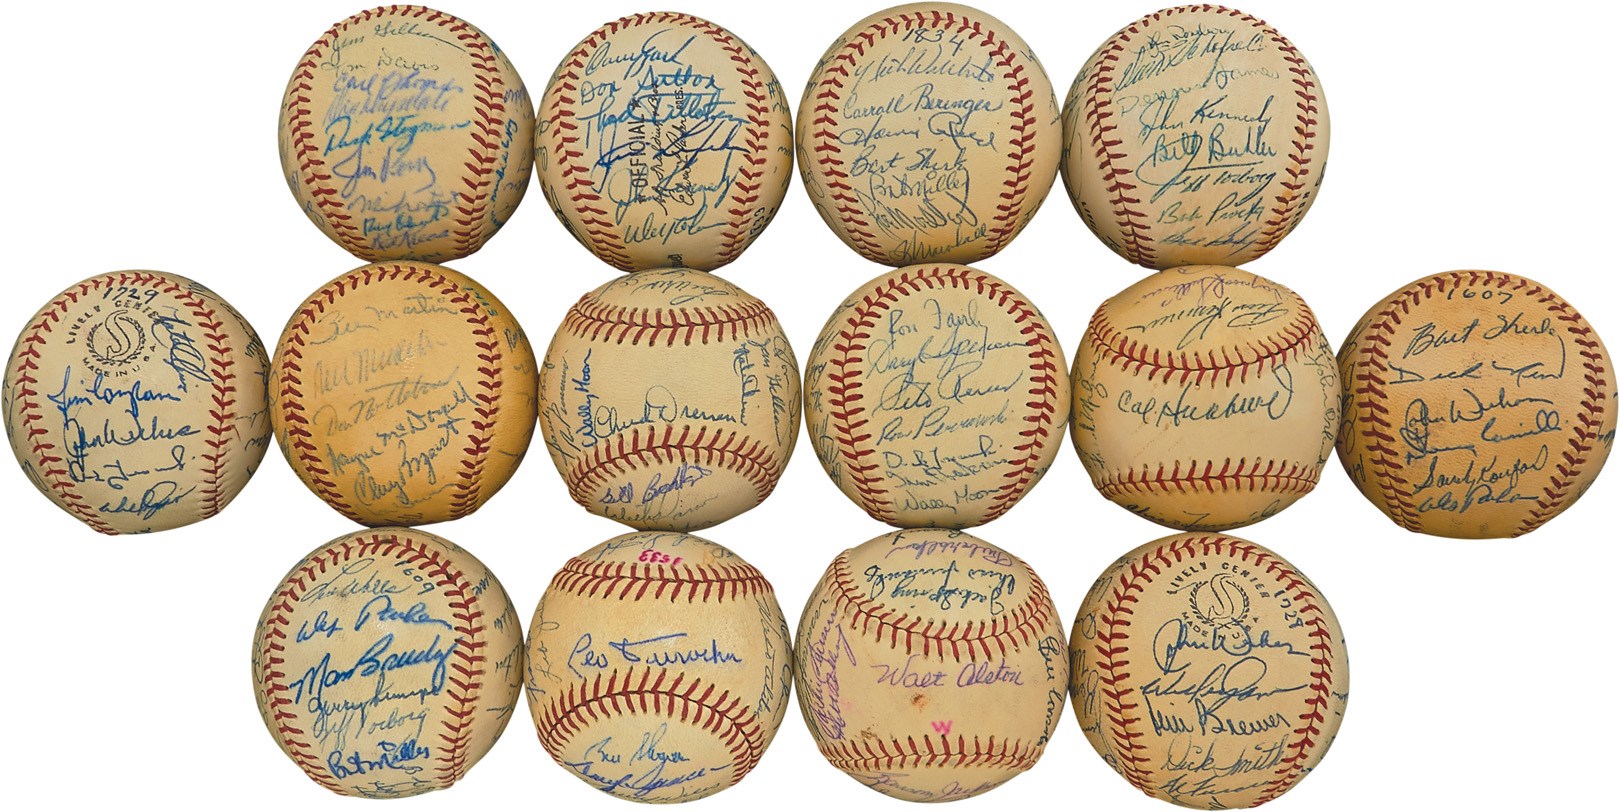 1957-67 Brooklyn/LA Dodgers Team-Signed Baseball Near Complete Run with Four (4) World Champions (14)